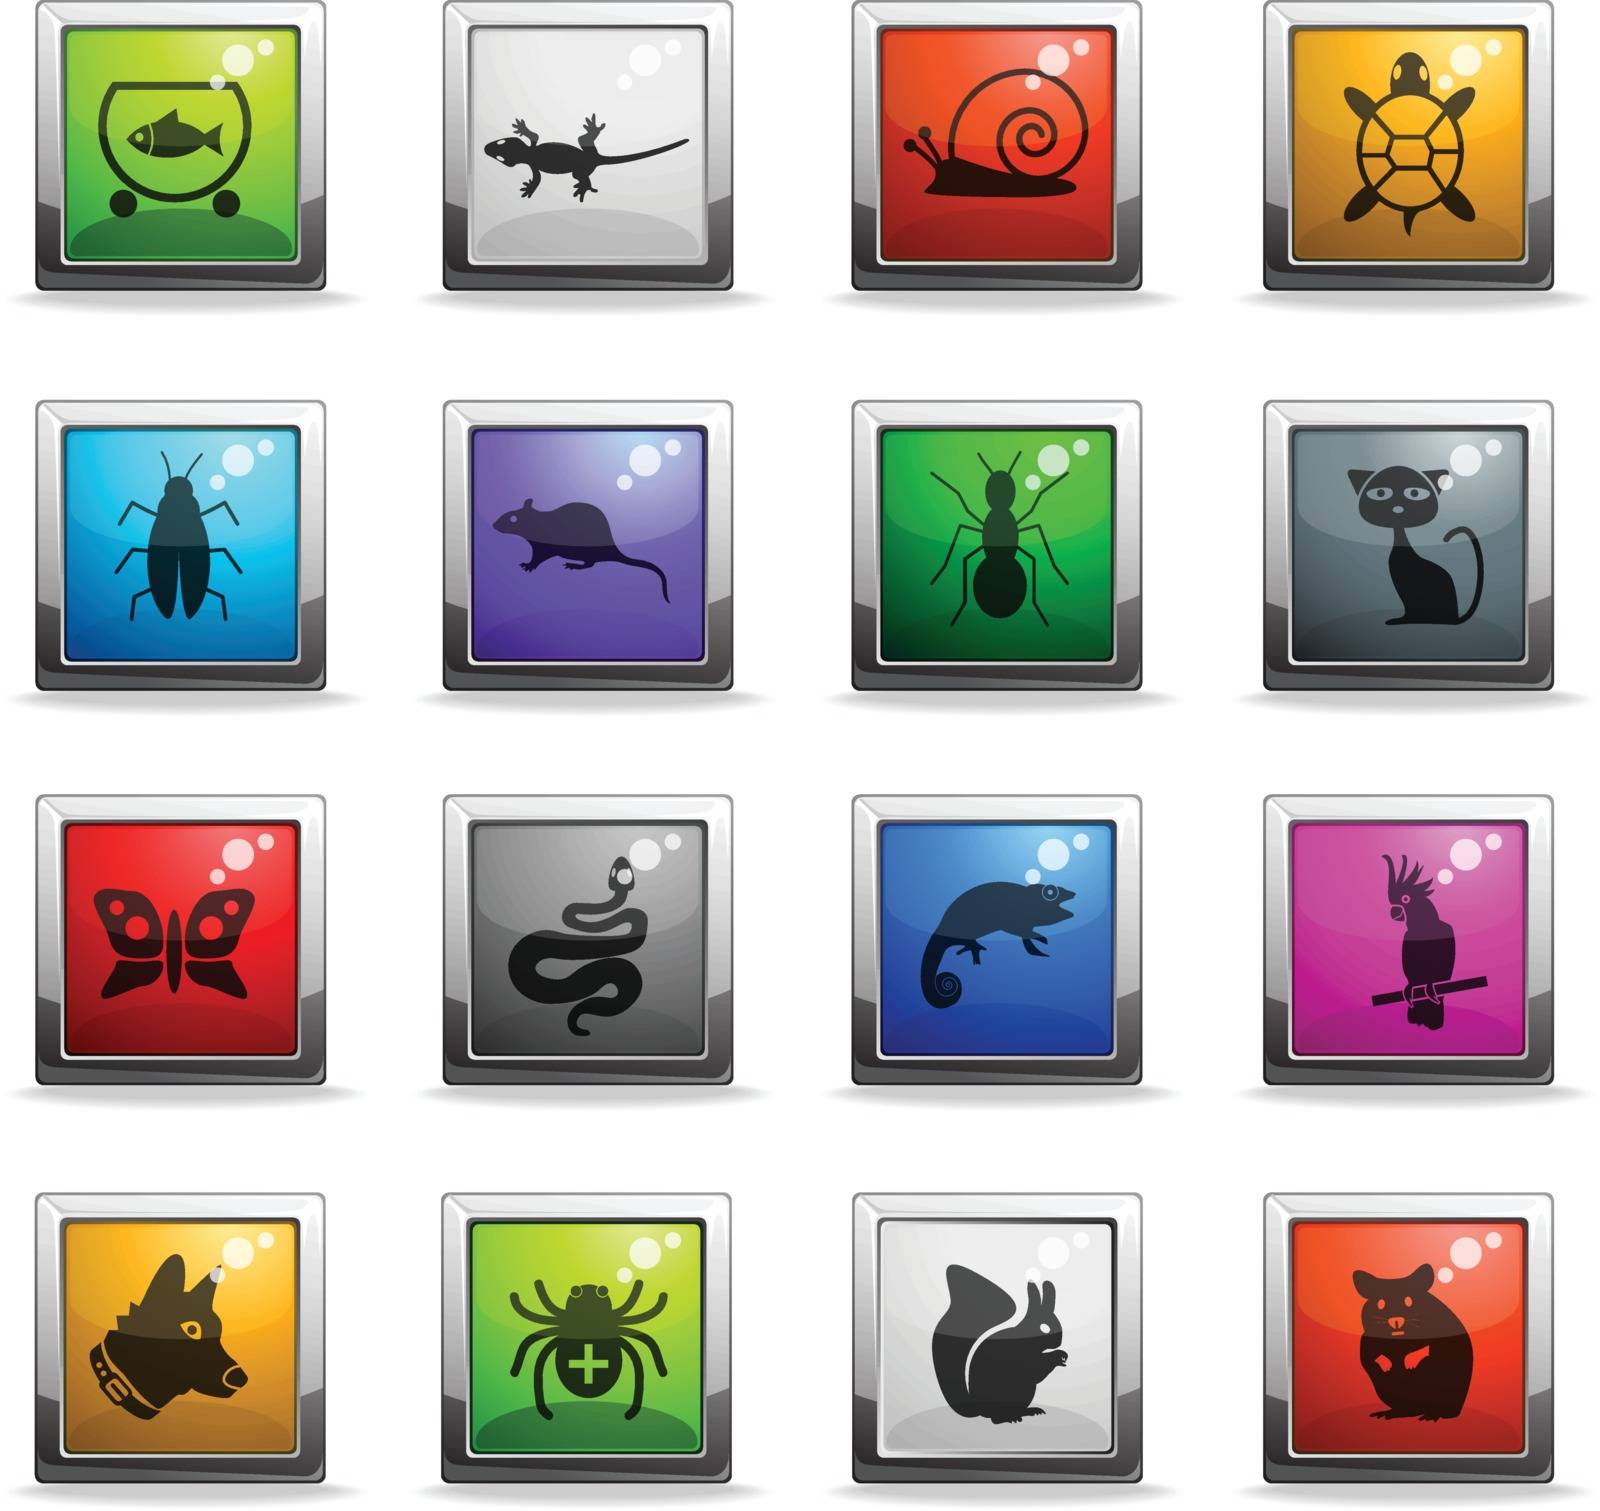 pets web icons in square colored buttons for user interface design